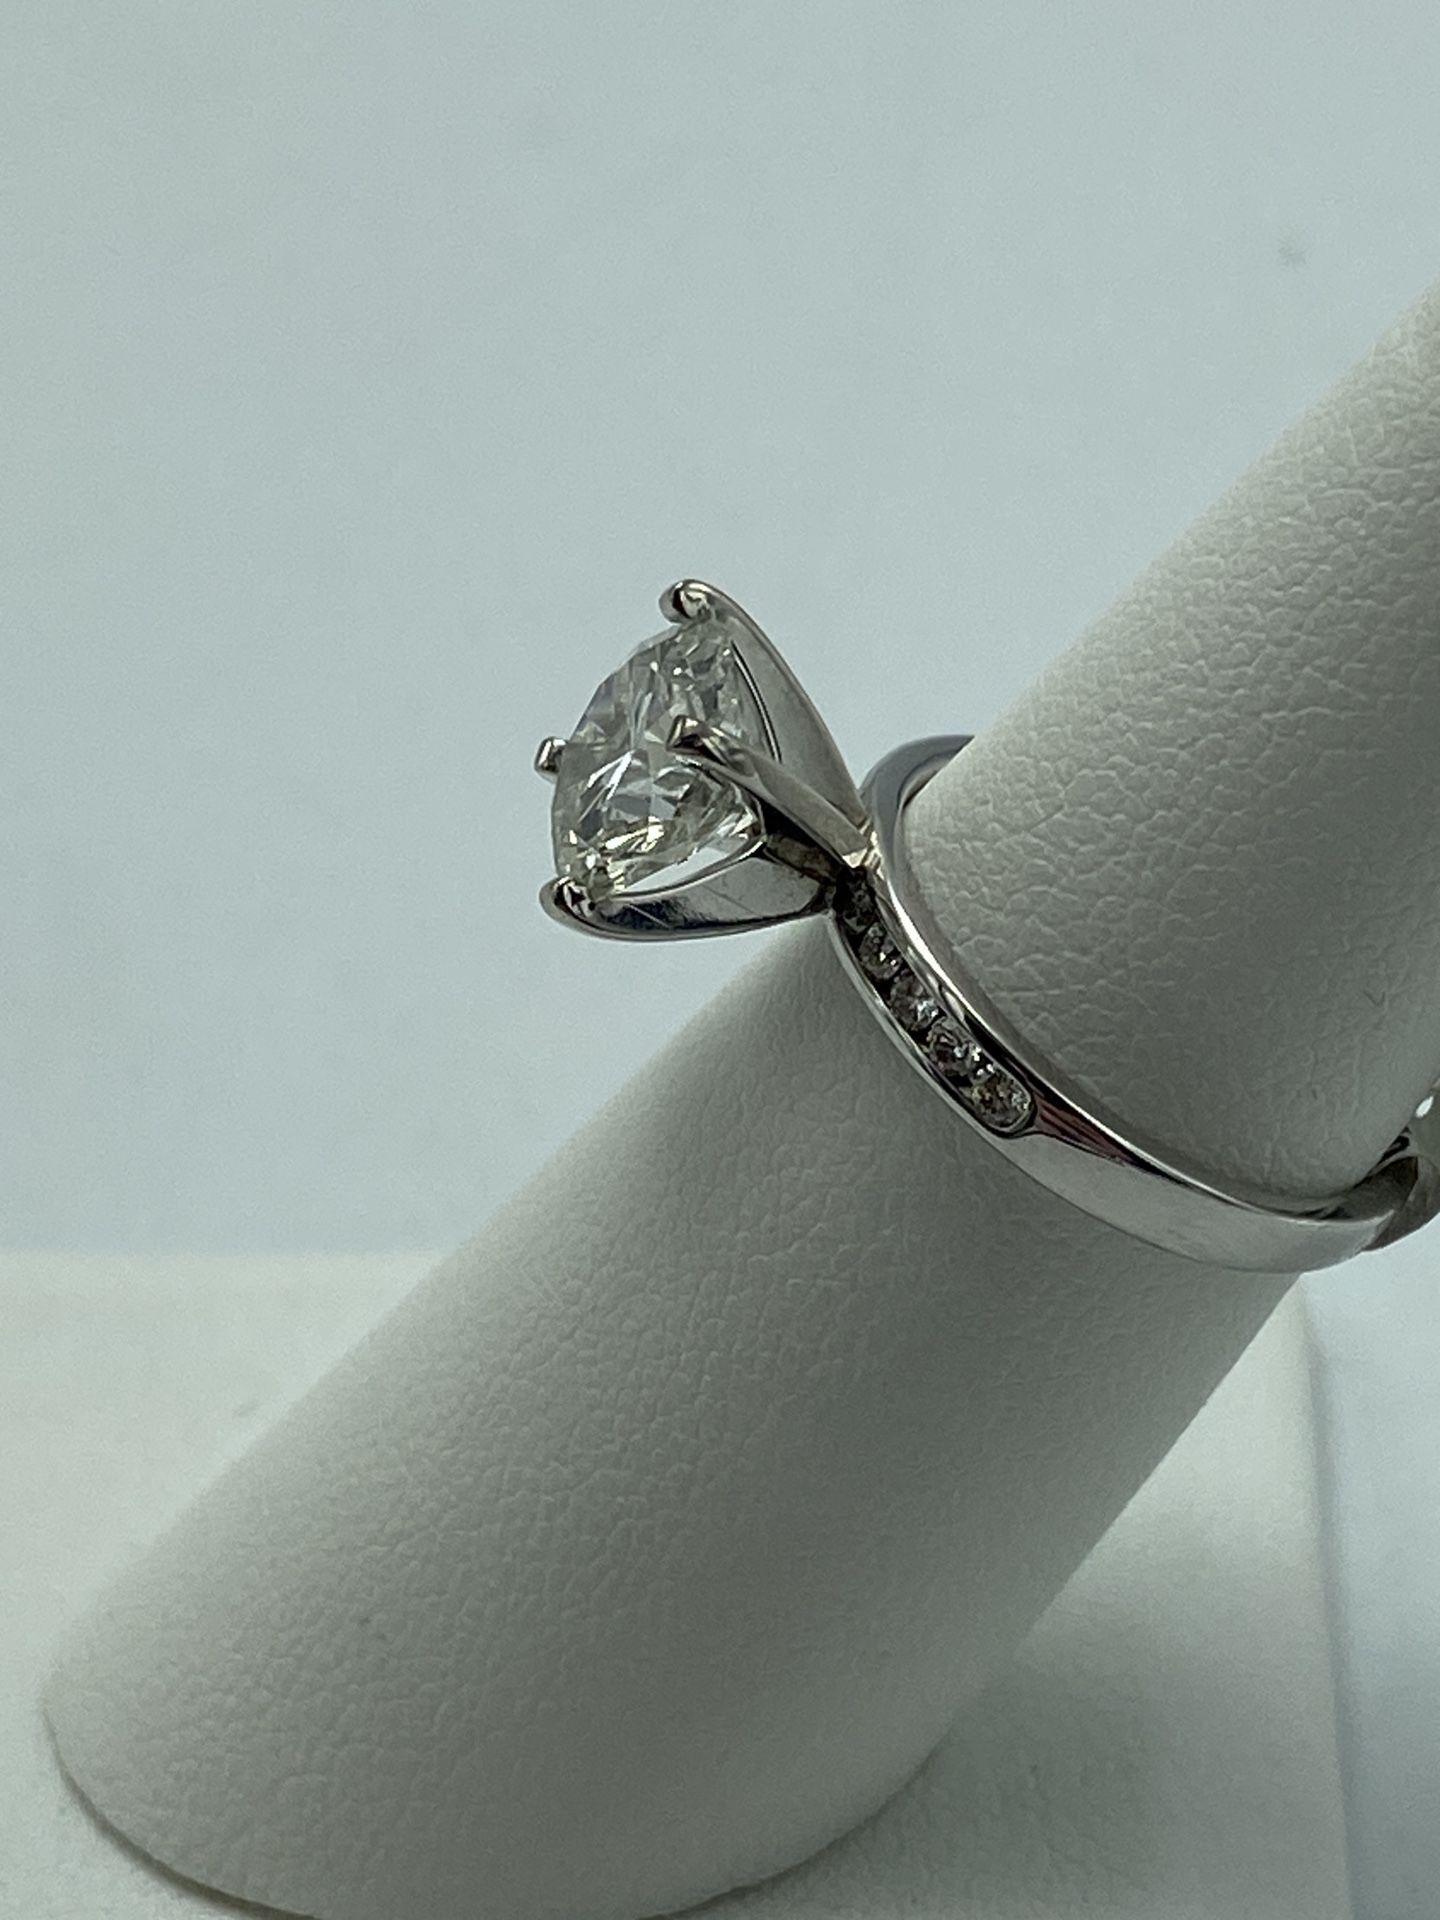 14kt White Gold Engagement Ring With 2.32ct Round Diamond